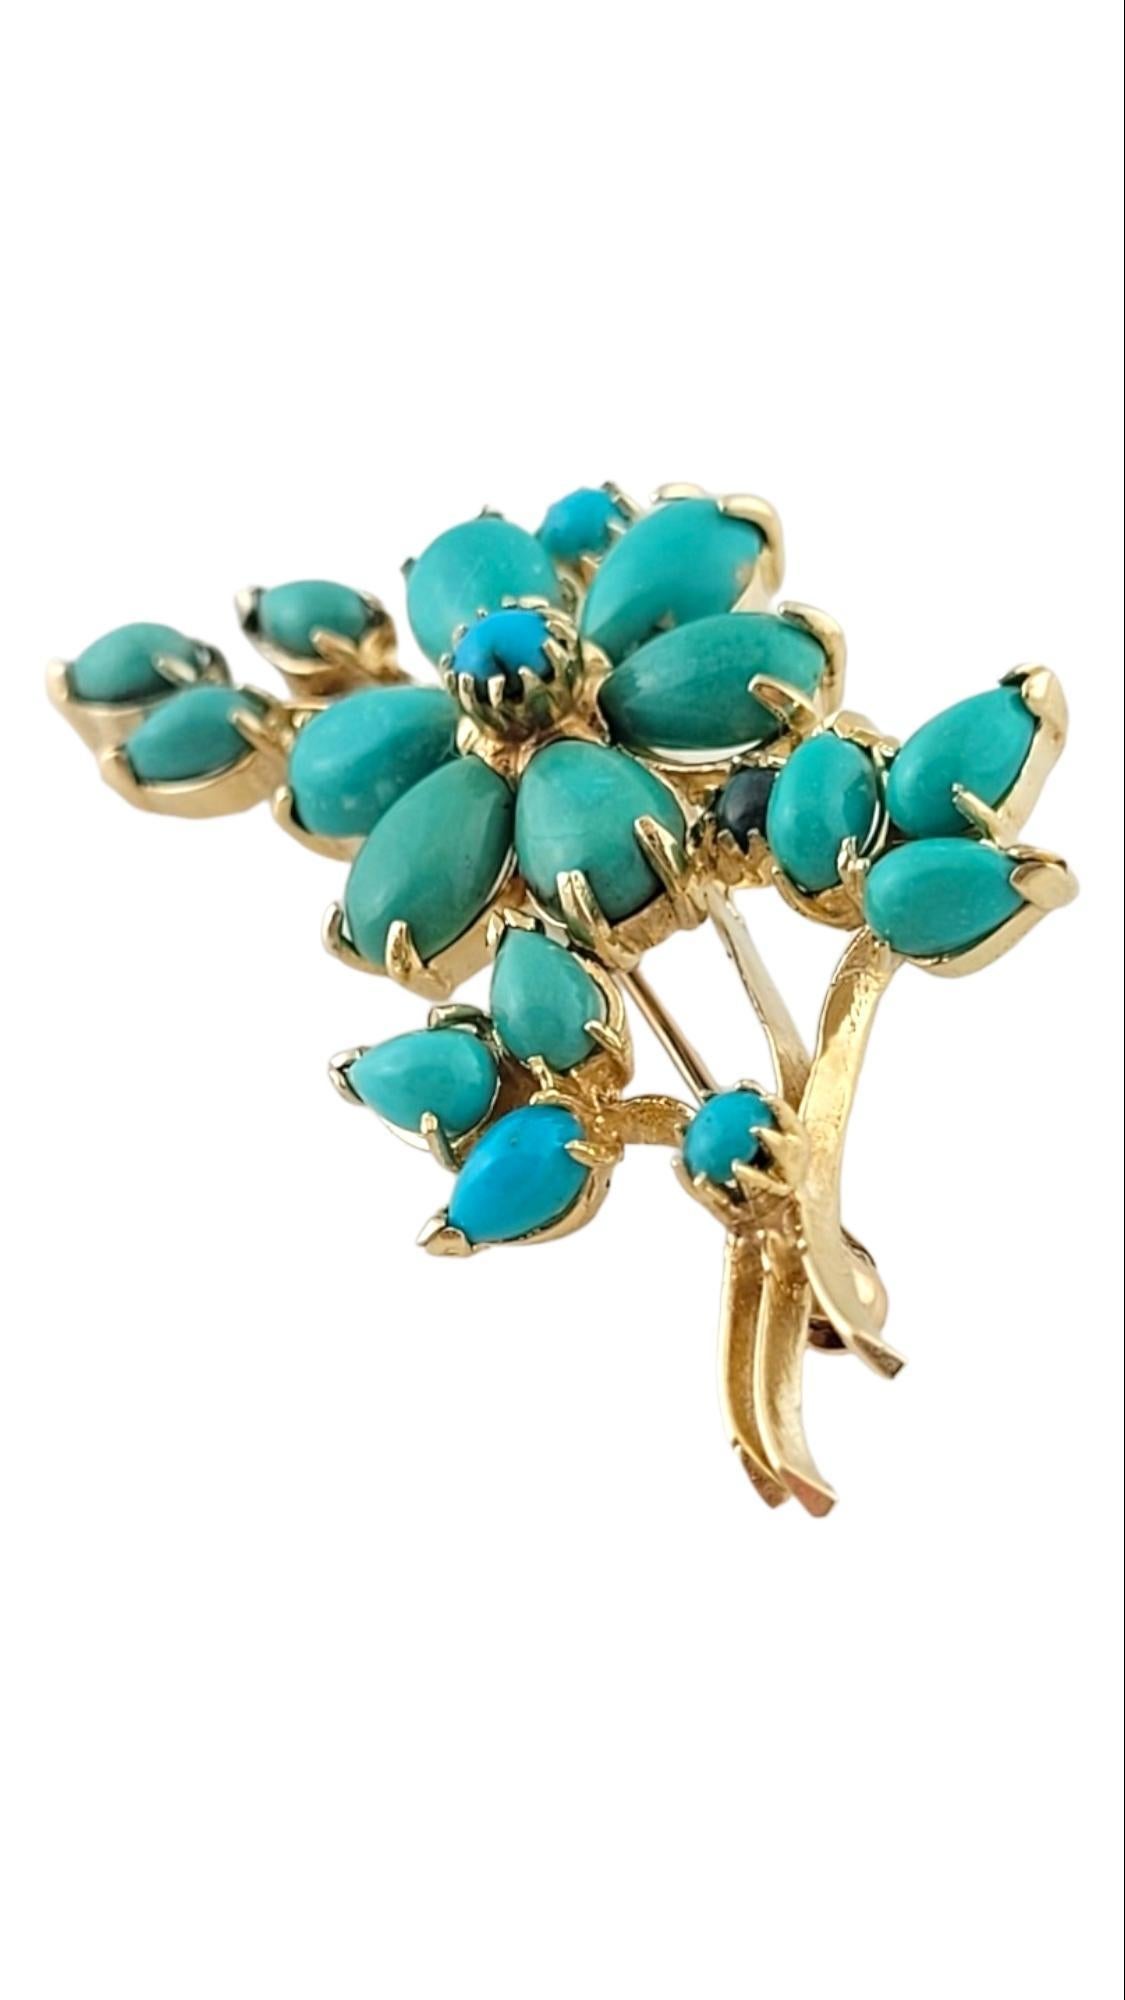 14K Yellow Gold Flower Pin with Turquoise Stones

This gorgeous 14K gold flower pin is decorated with 19 beautiful turquoise stones!

Size: 46.4mm X 23.5mm X 7.9mm

Weight: 7.32 g/ 4.7 dwt

Hallmark: 14K

Very good condition, professionally